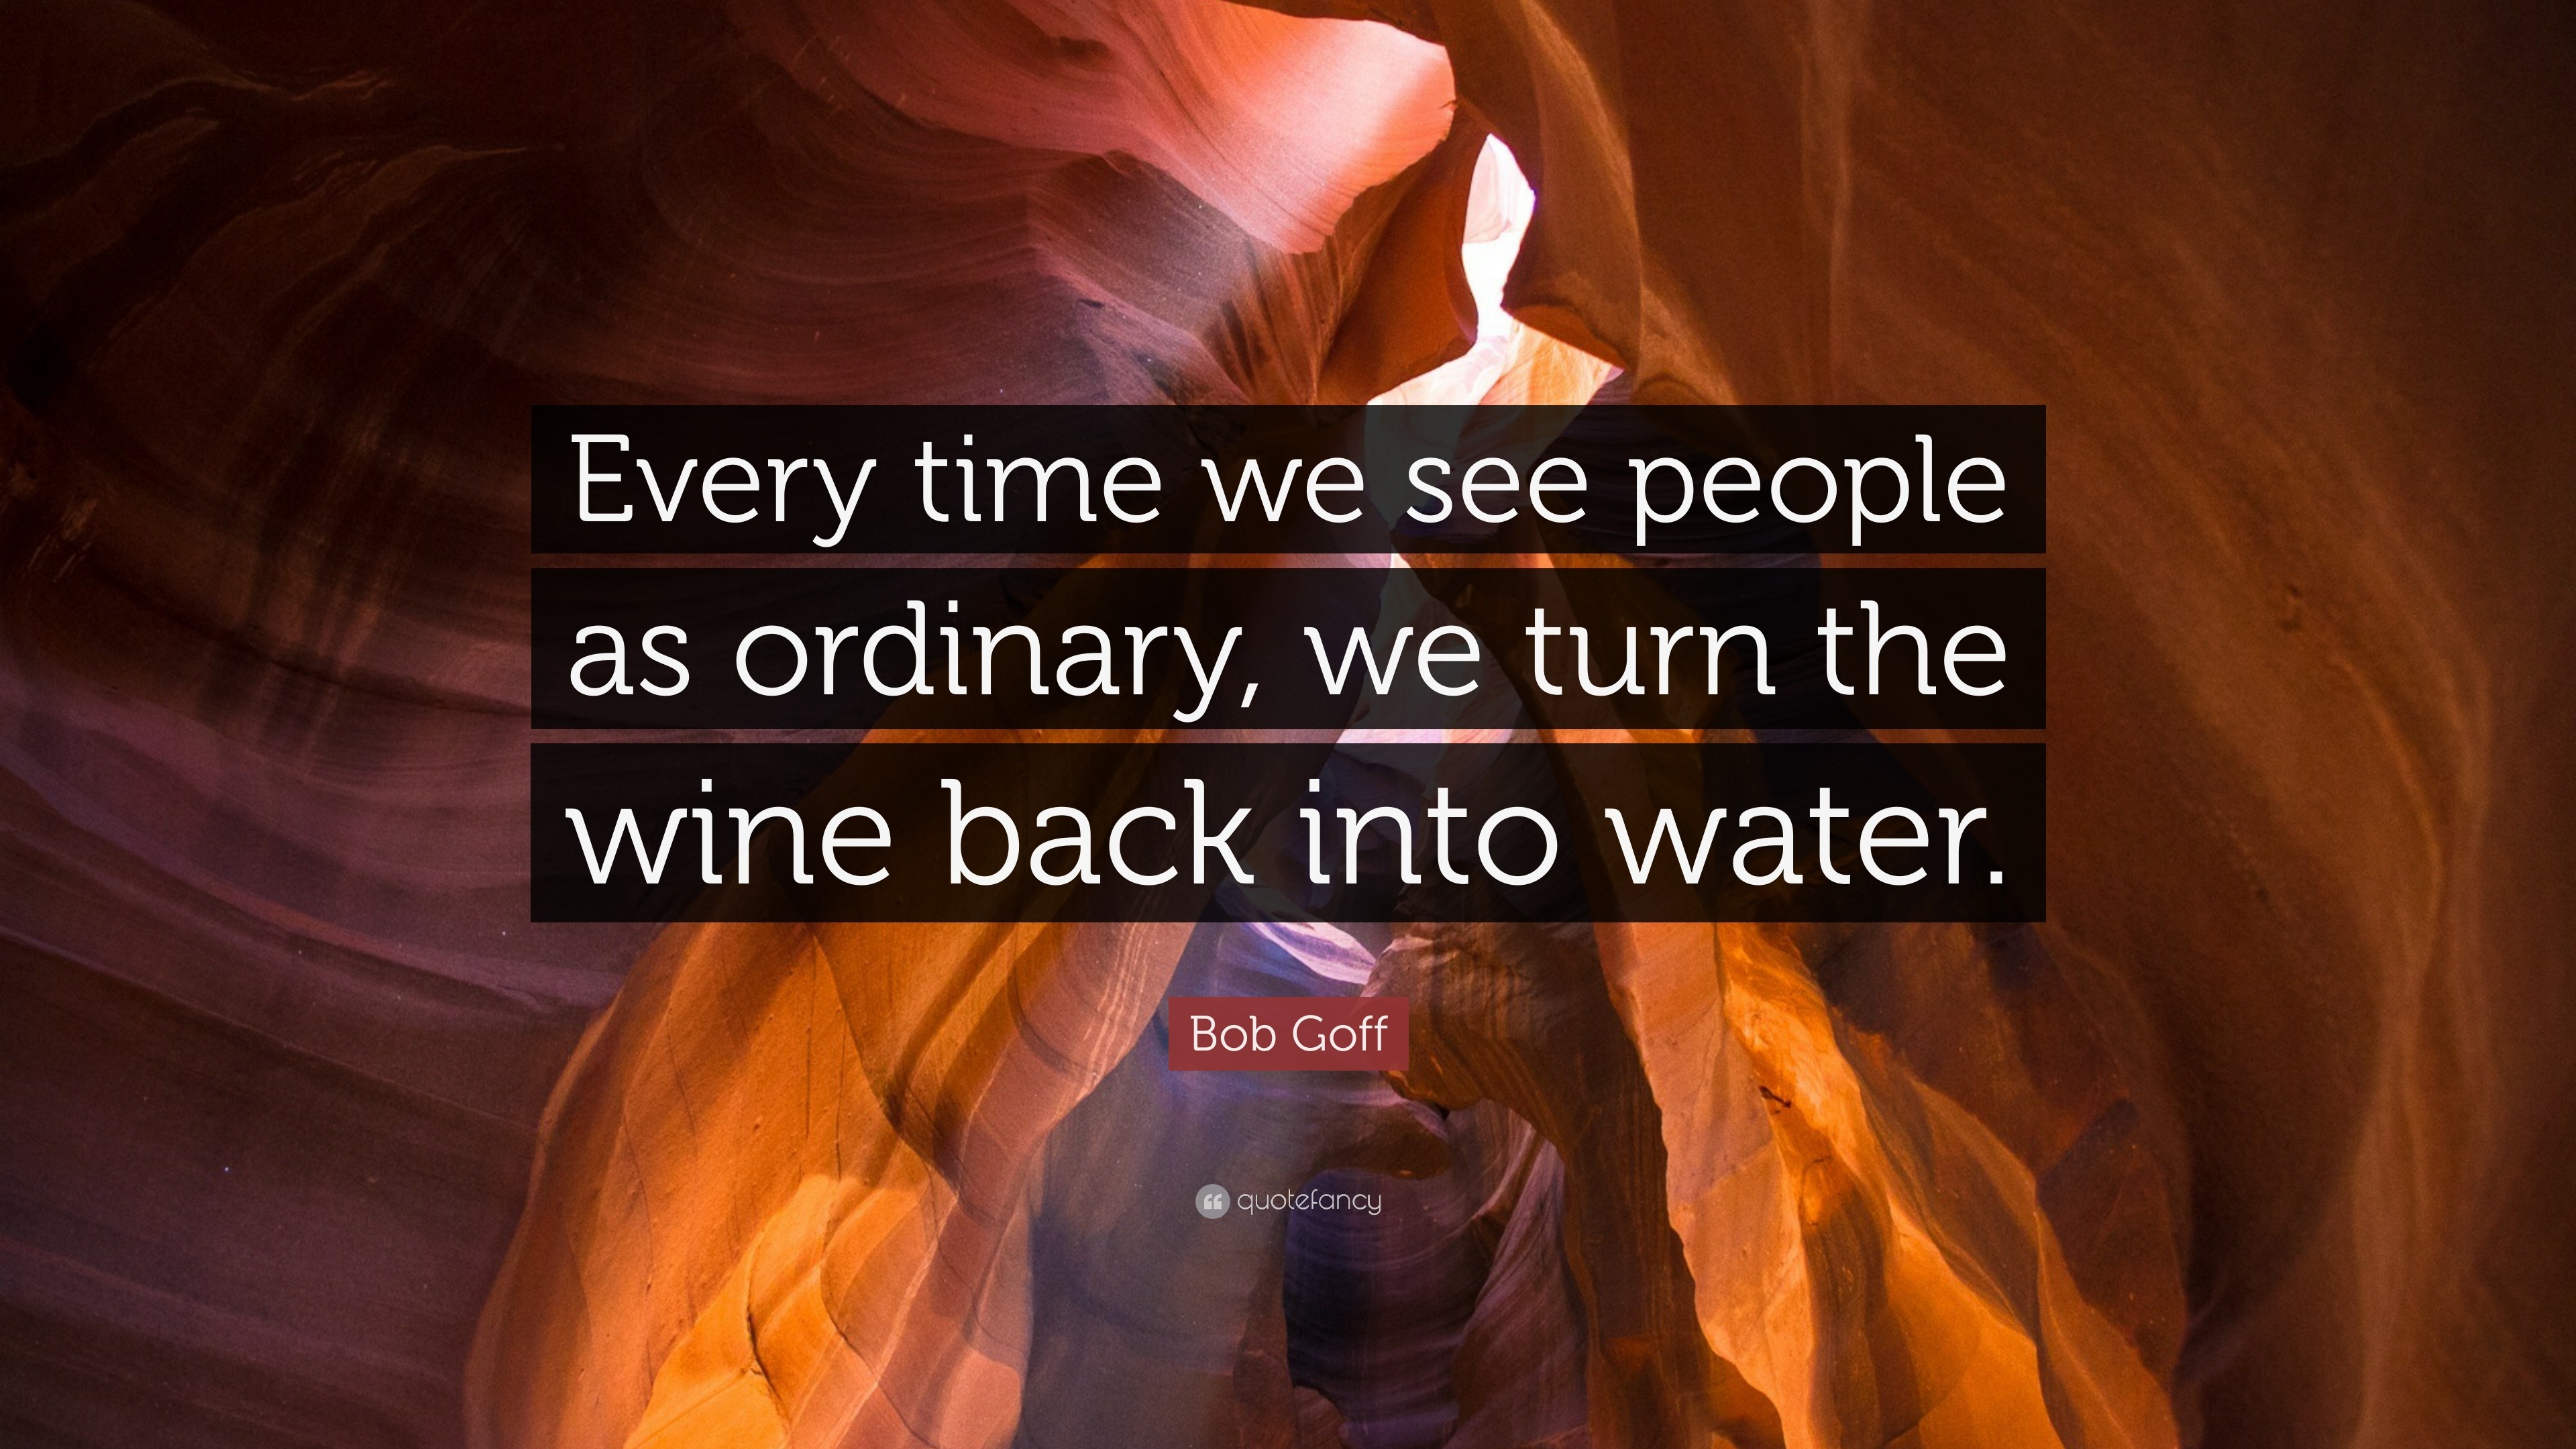 https://quotefancy.com/media/wallpaper/3840x2160/806428-Bob-Goff-Quote-Every-time-we-see-people-as-ordinary-we-turn-the.jpg